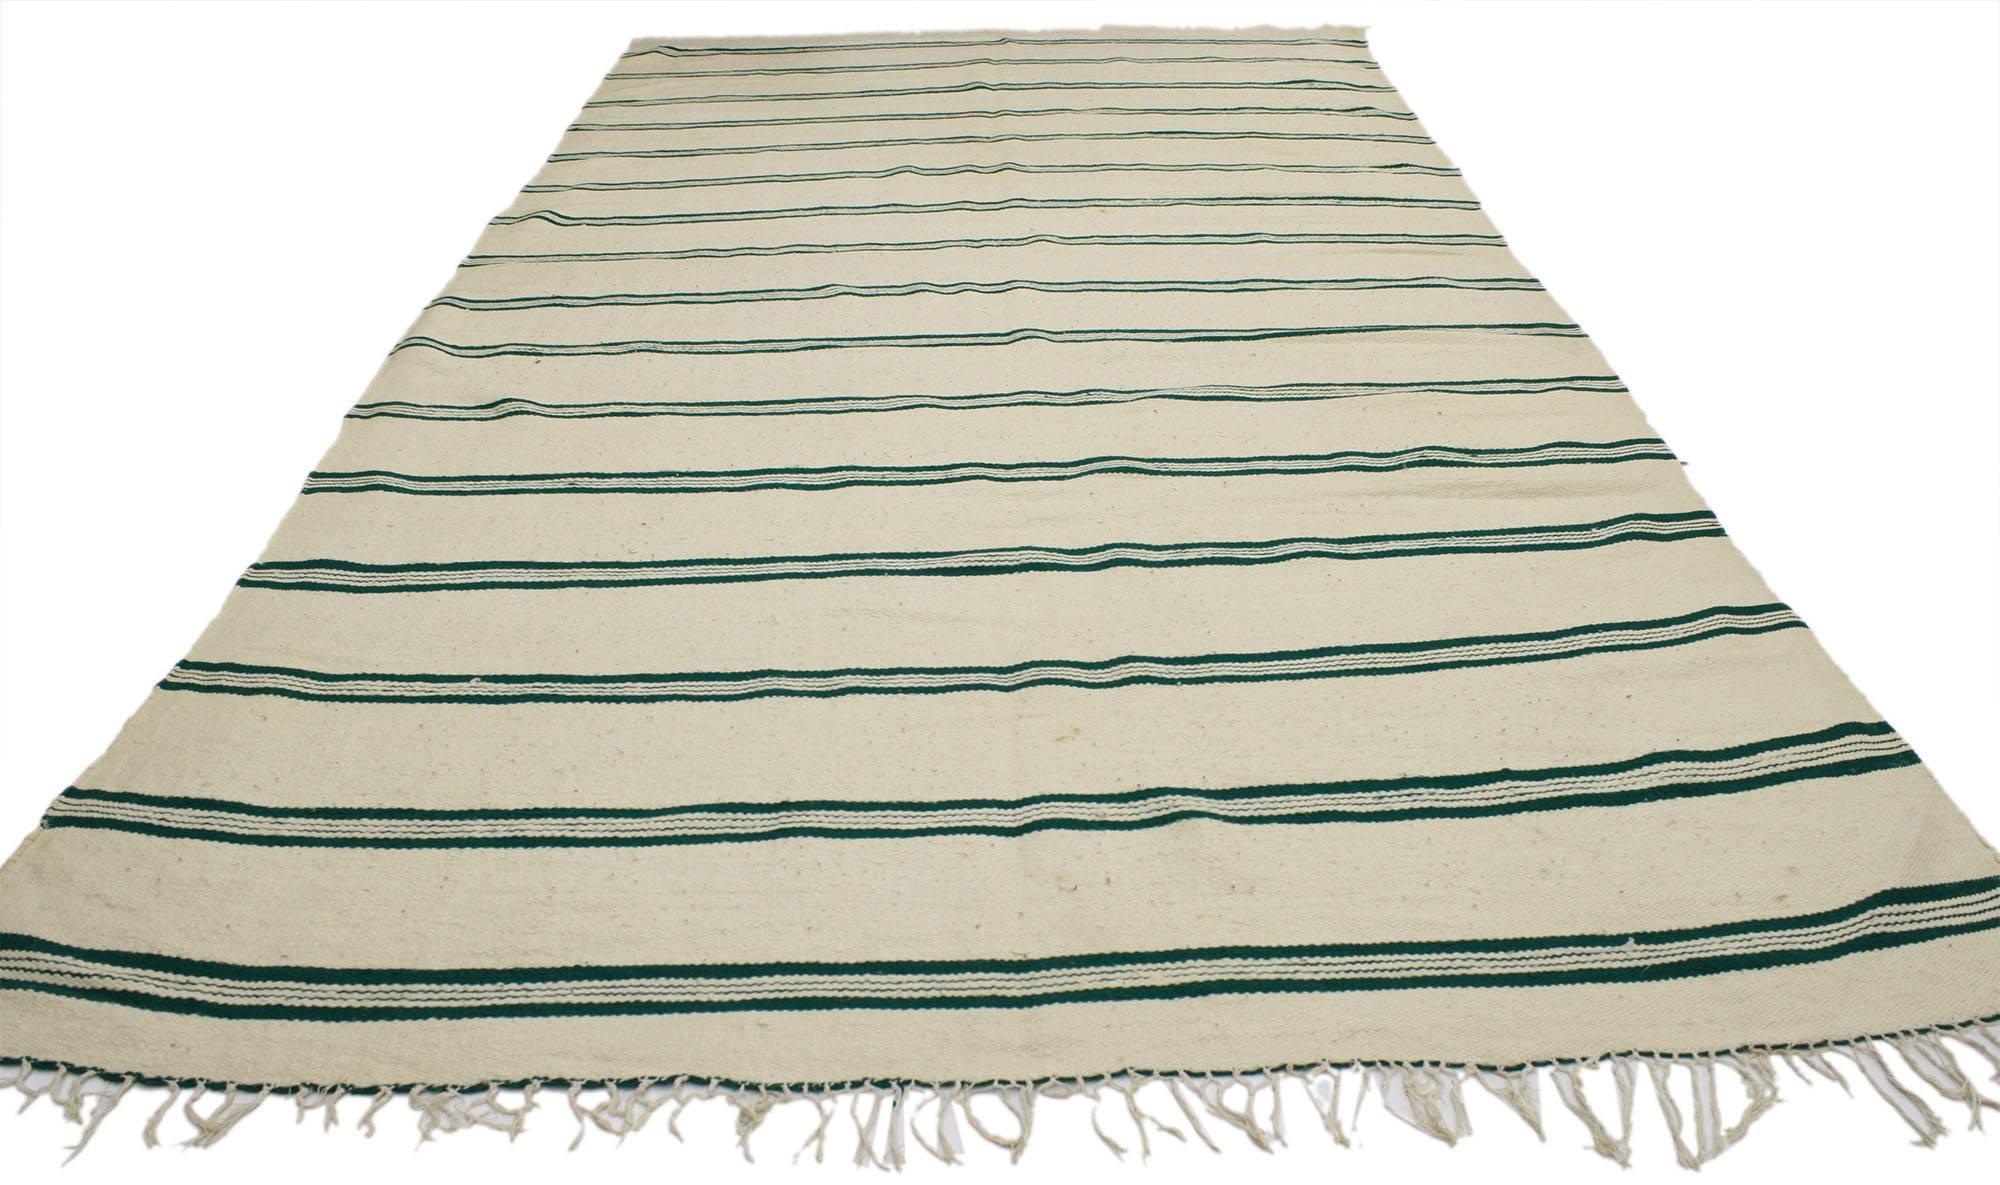 20554, Modern Striped Area Rug, Vintage Berber Moroccan Kilim Rug with Stripes 05'04 x 11'02. This handwoven wool Vintage Berber Moroccan Kilim rug with stripes is rendered in variegated shades of creamy beige and dark green. Kilims are not only